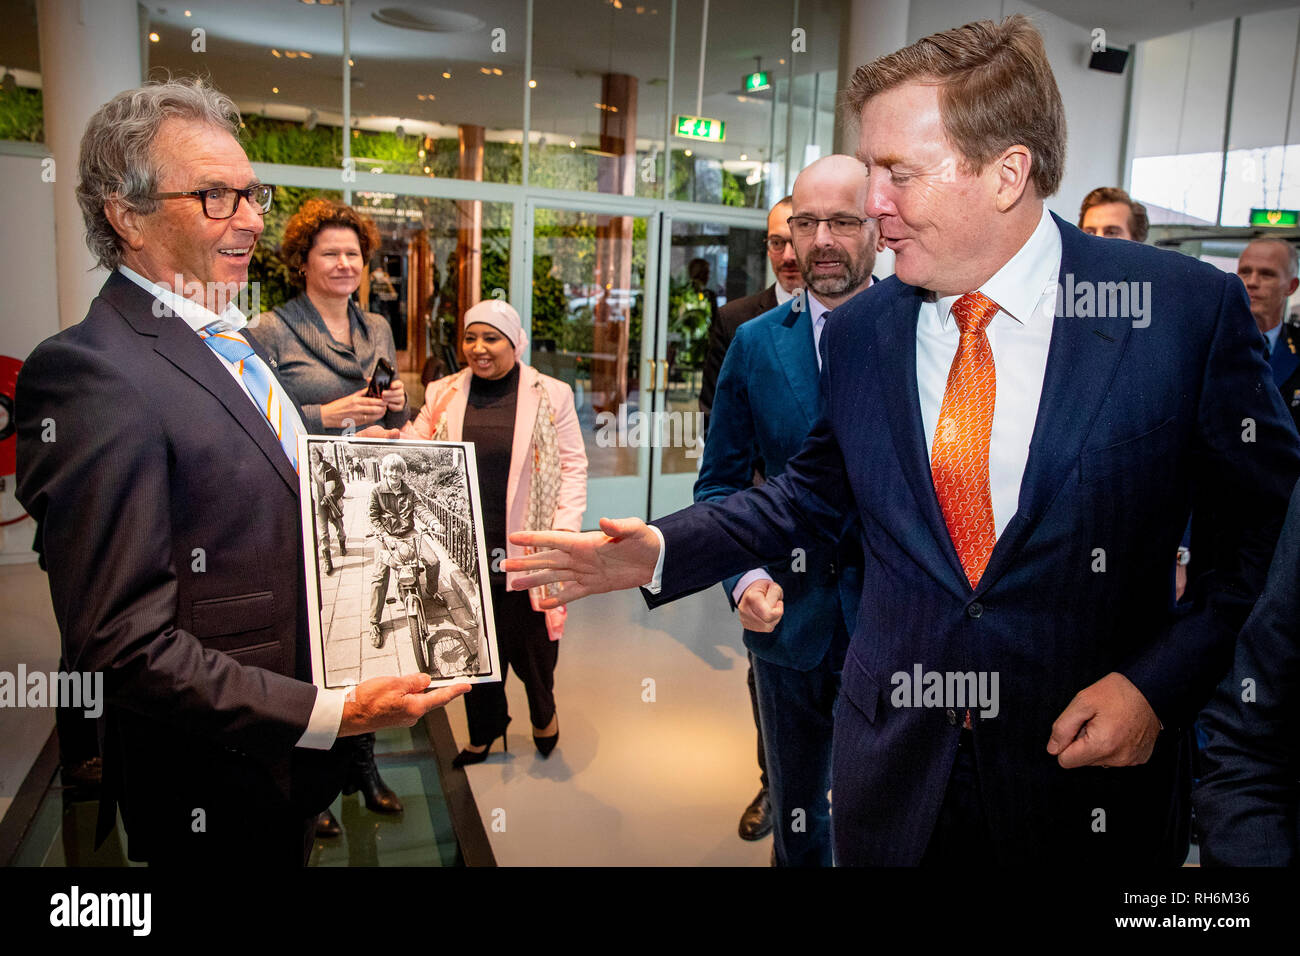 Hilversum, Netherlands. 1st Feb, 2019. King Willem-Alexander receives an paparazzi picture of himself at the age of 16 from paparazzi photographer Leo Vogelzang during the award ceremony of the Zilveren Camera for the best photojournalist of the year in Hilversum, Netherlands, 1 February 2019. Winner of the award is Cynthia Boll for her photo series Sinking Cities Jakarta. Credit: Patrick van Katwijk/ |/dpa/Alamy Live News Stock Photo